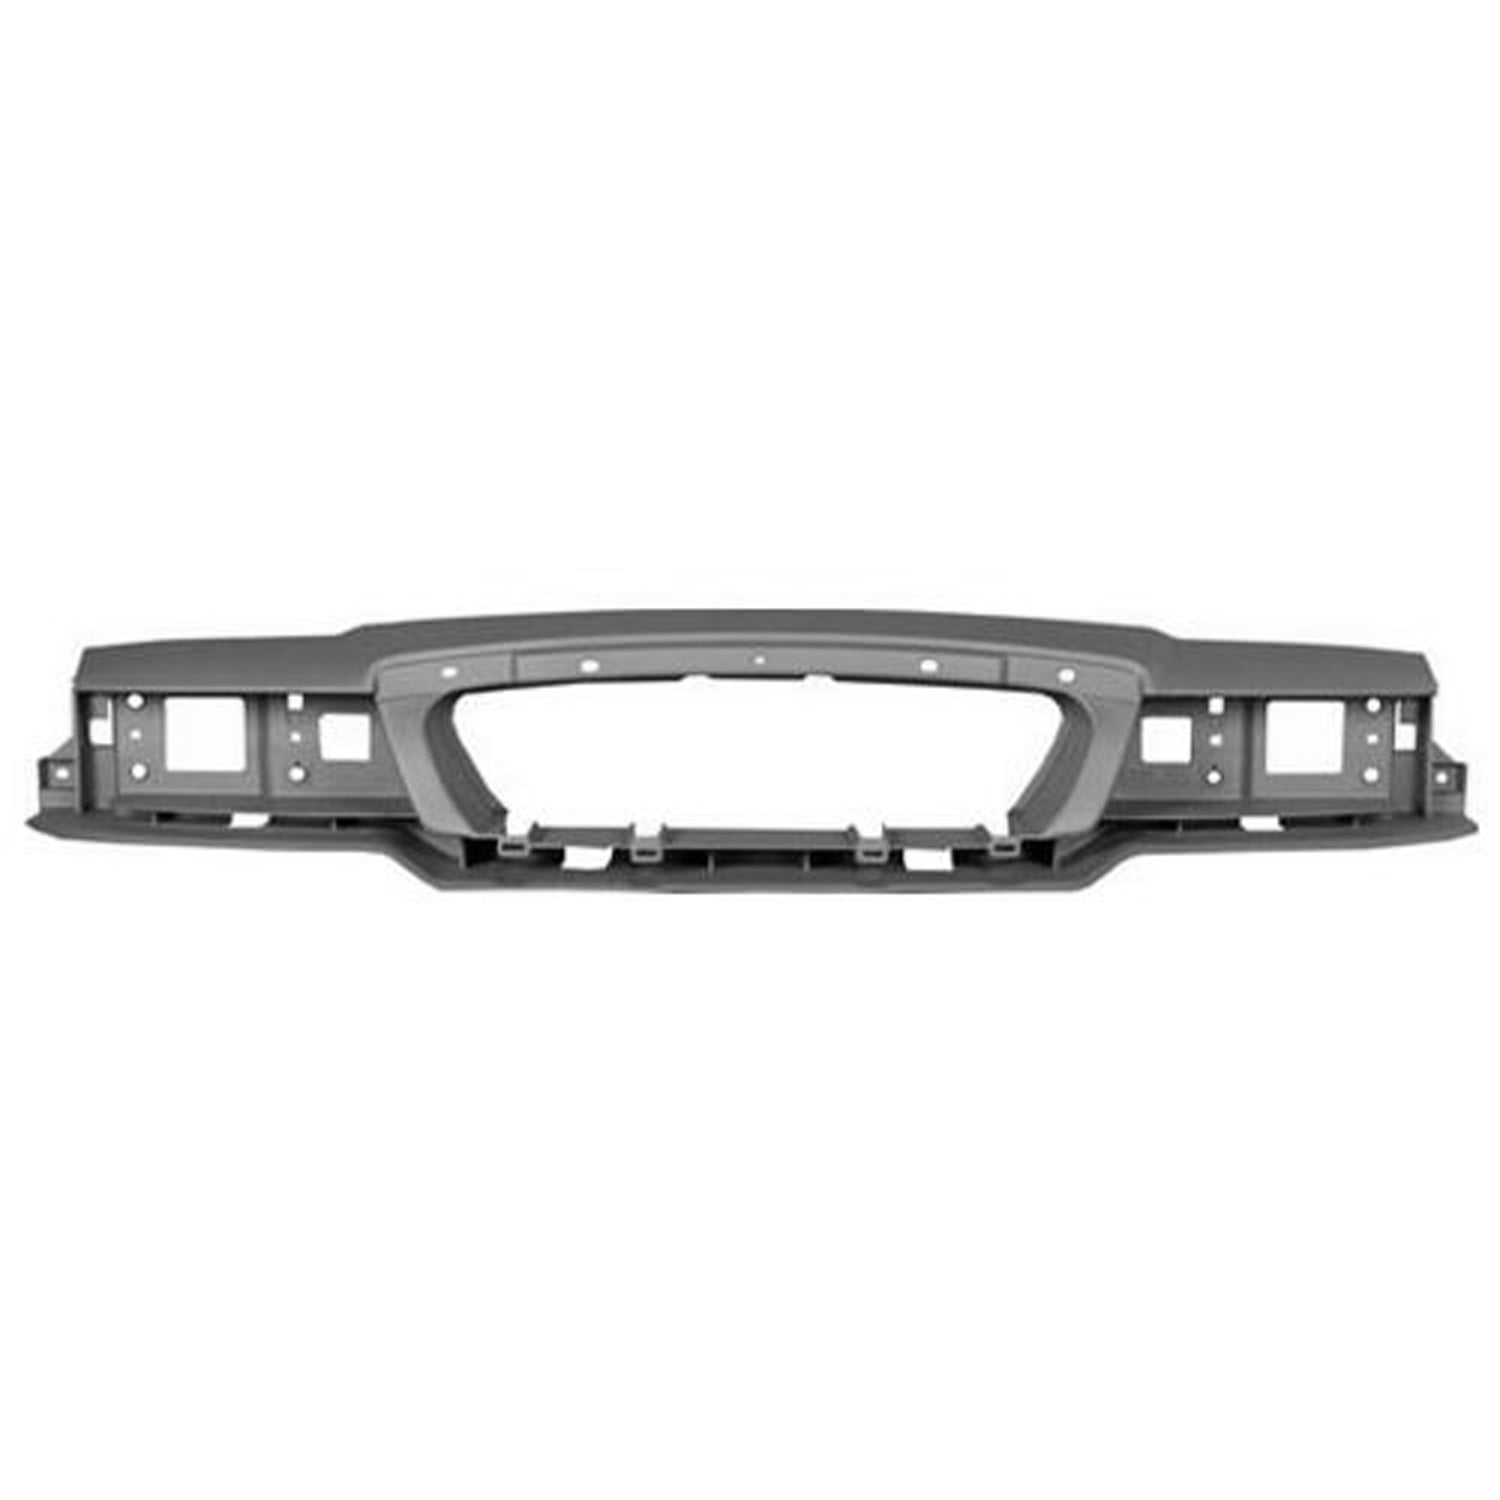 Header Panel Compatible with MERCURY GRAND MARQUIS 1992-1994 Complete Thermoplastic and Fiberglass 